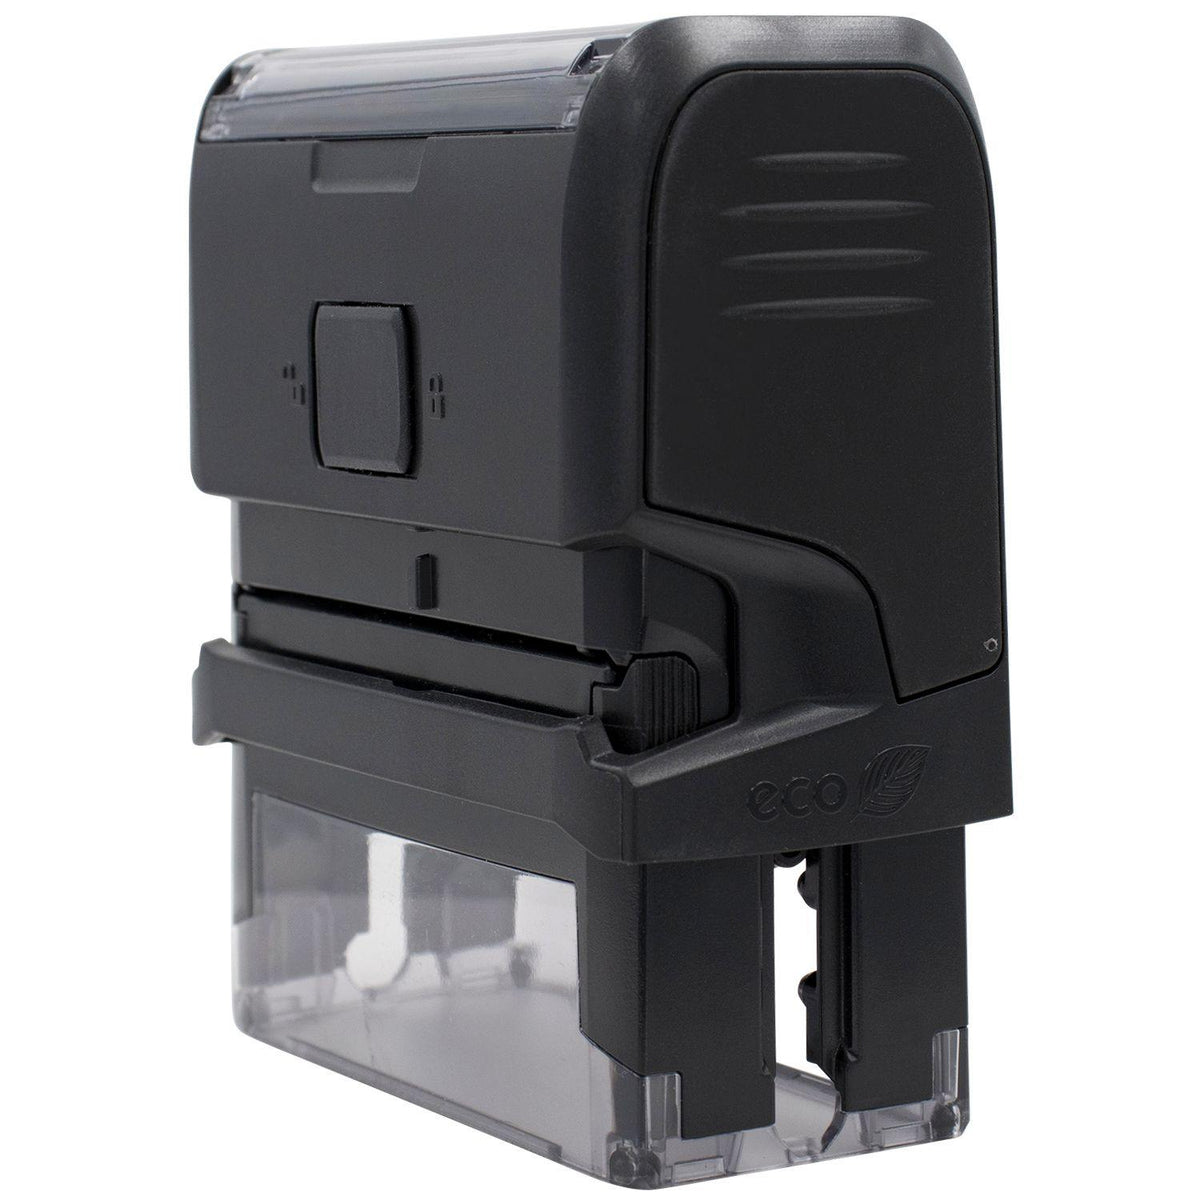 Large Self Inking Of Stamp - Engineer Seal Stamps - Brand_Trodat, Impression Size_Large, Stamp Type_Self-Inking Stamp, Type of Use_Office